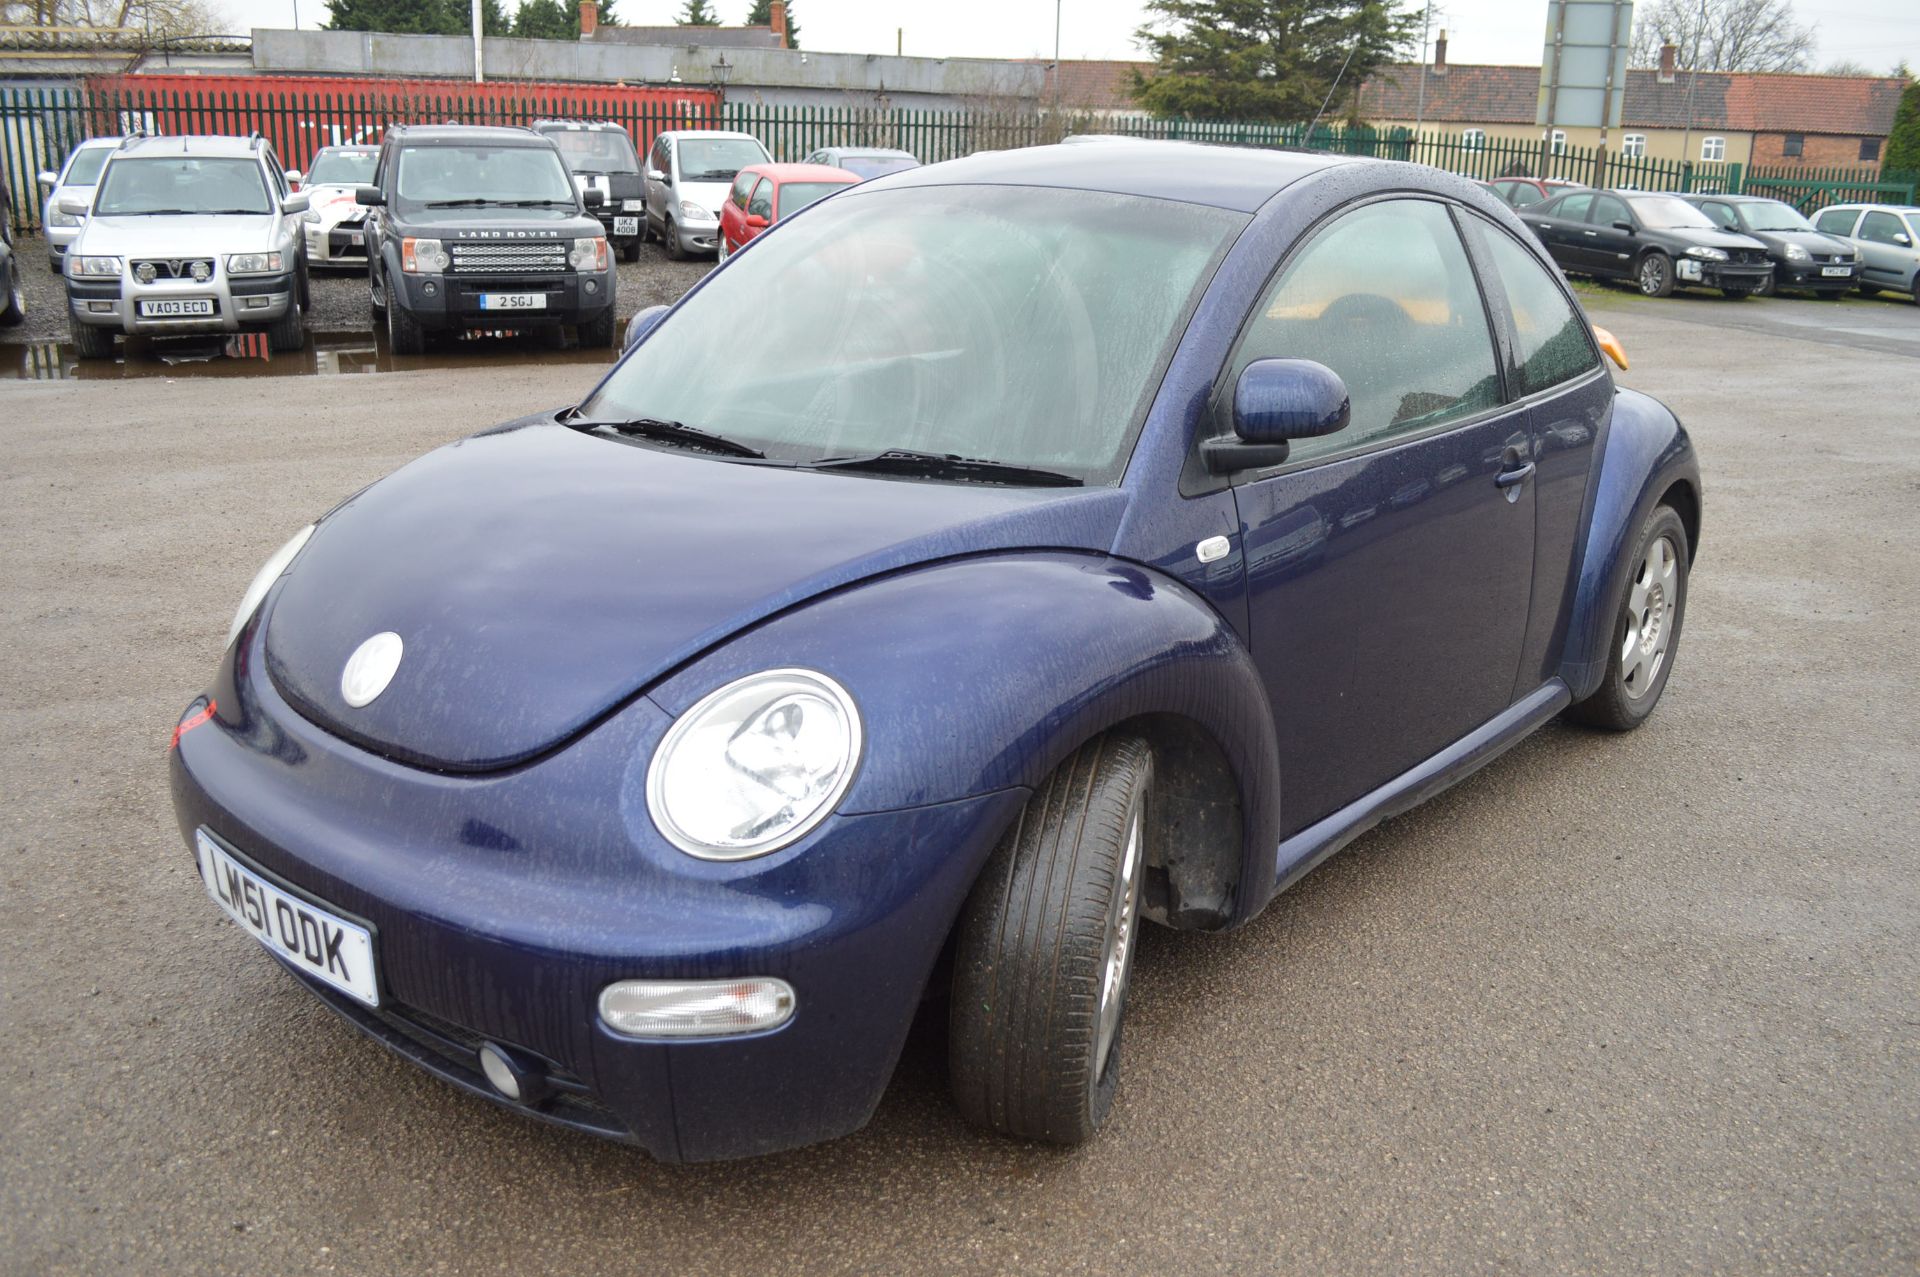 2001/51 REG VOLKSWAGEN BEETLE TURBO 1.8 TRACK CAR 5 SPEED MANUAL GOOD STRONG ENGINE AND BOX HAS JUST - Image 3 of 16